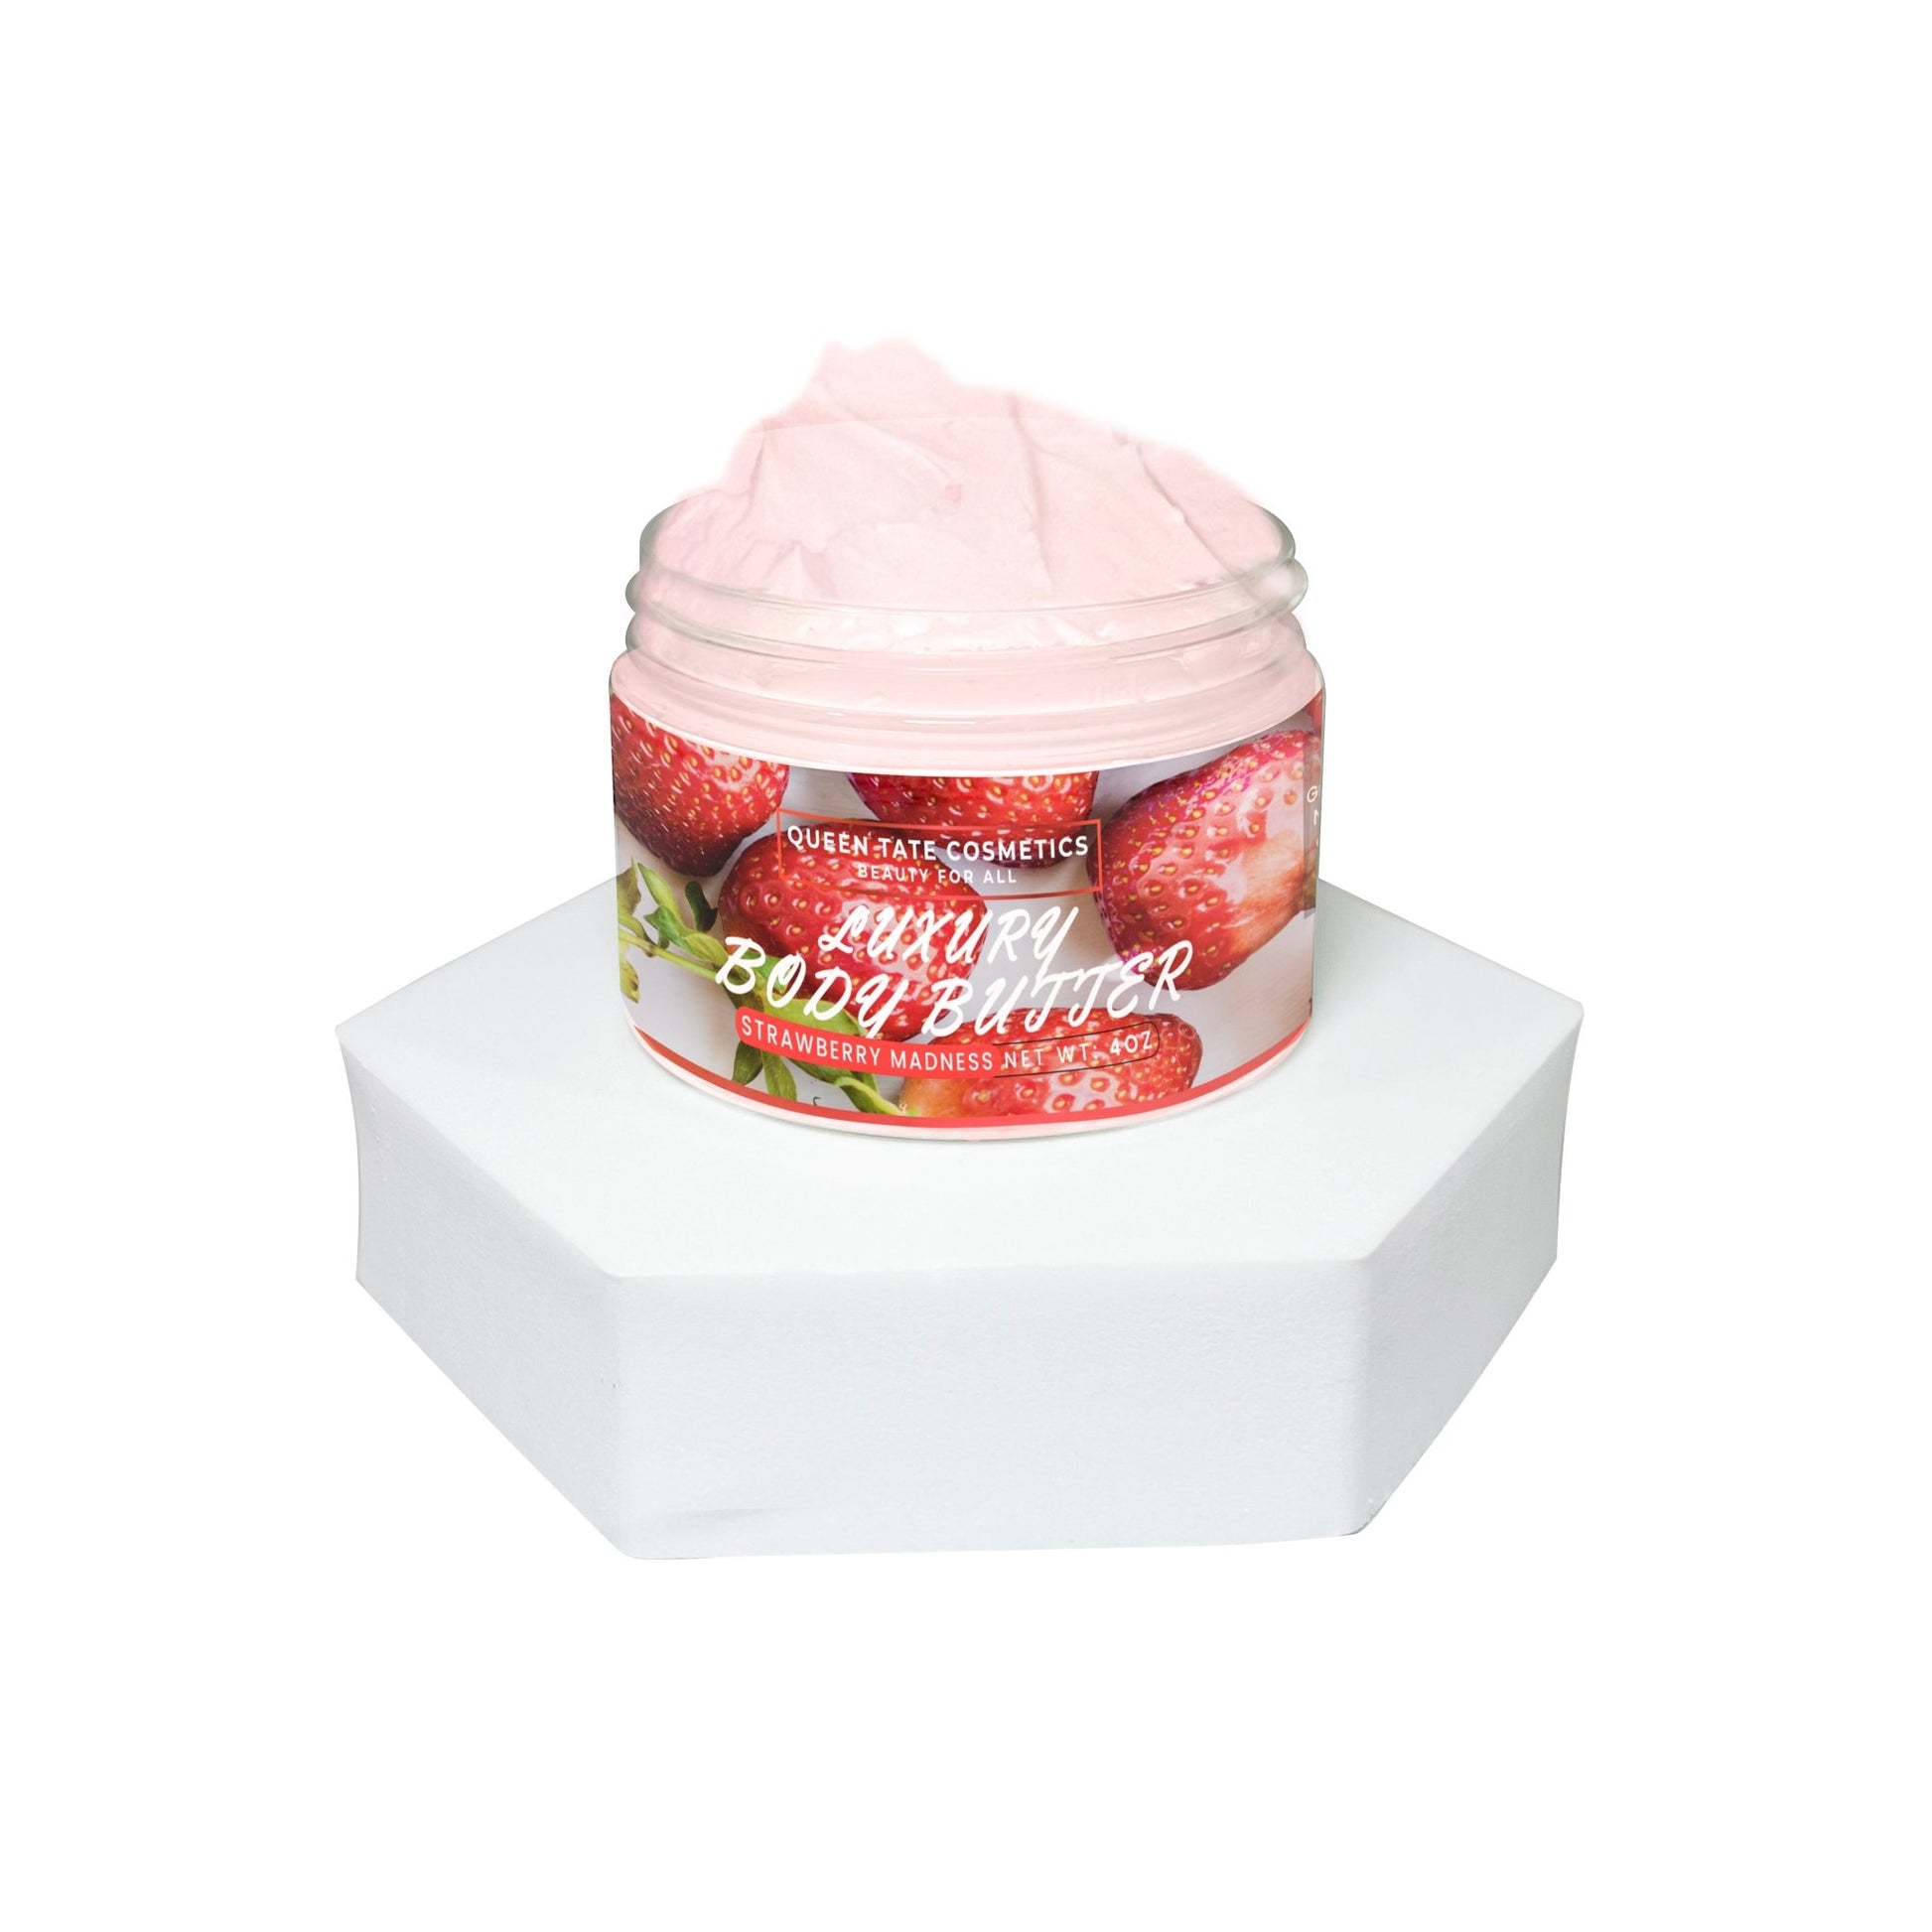 Strawberry Madness-Handcrafted Body Butter - Queen Tate CosmeticsHandcrafted Luxury Body ButterStrawberry Madness-Handcrafted Body ButterHandcrafted Luxury Body ButterQueen Tate Cosmetics 4 oz